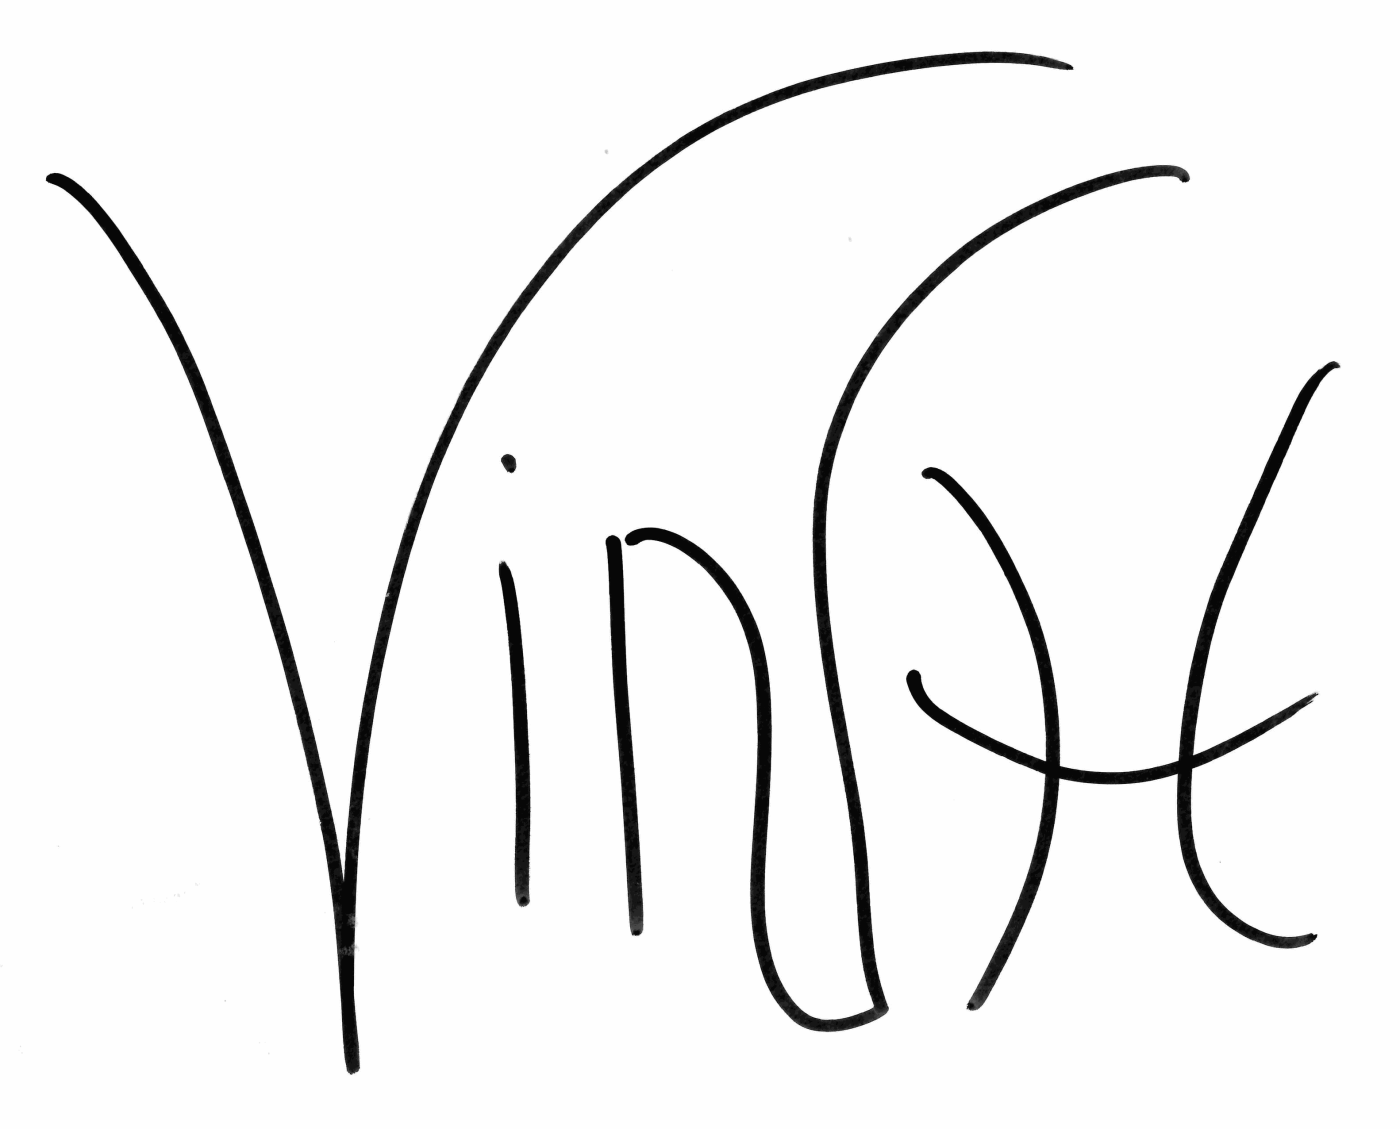 vinh-orthography